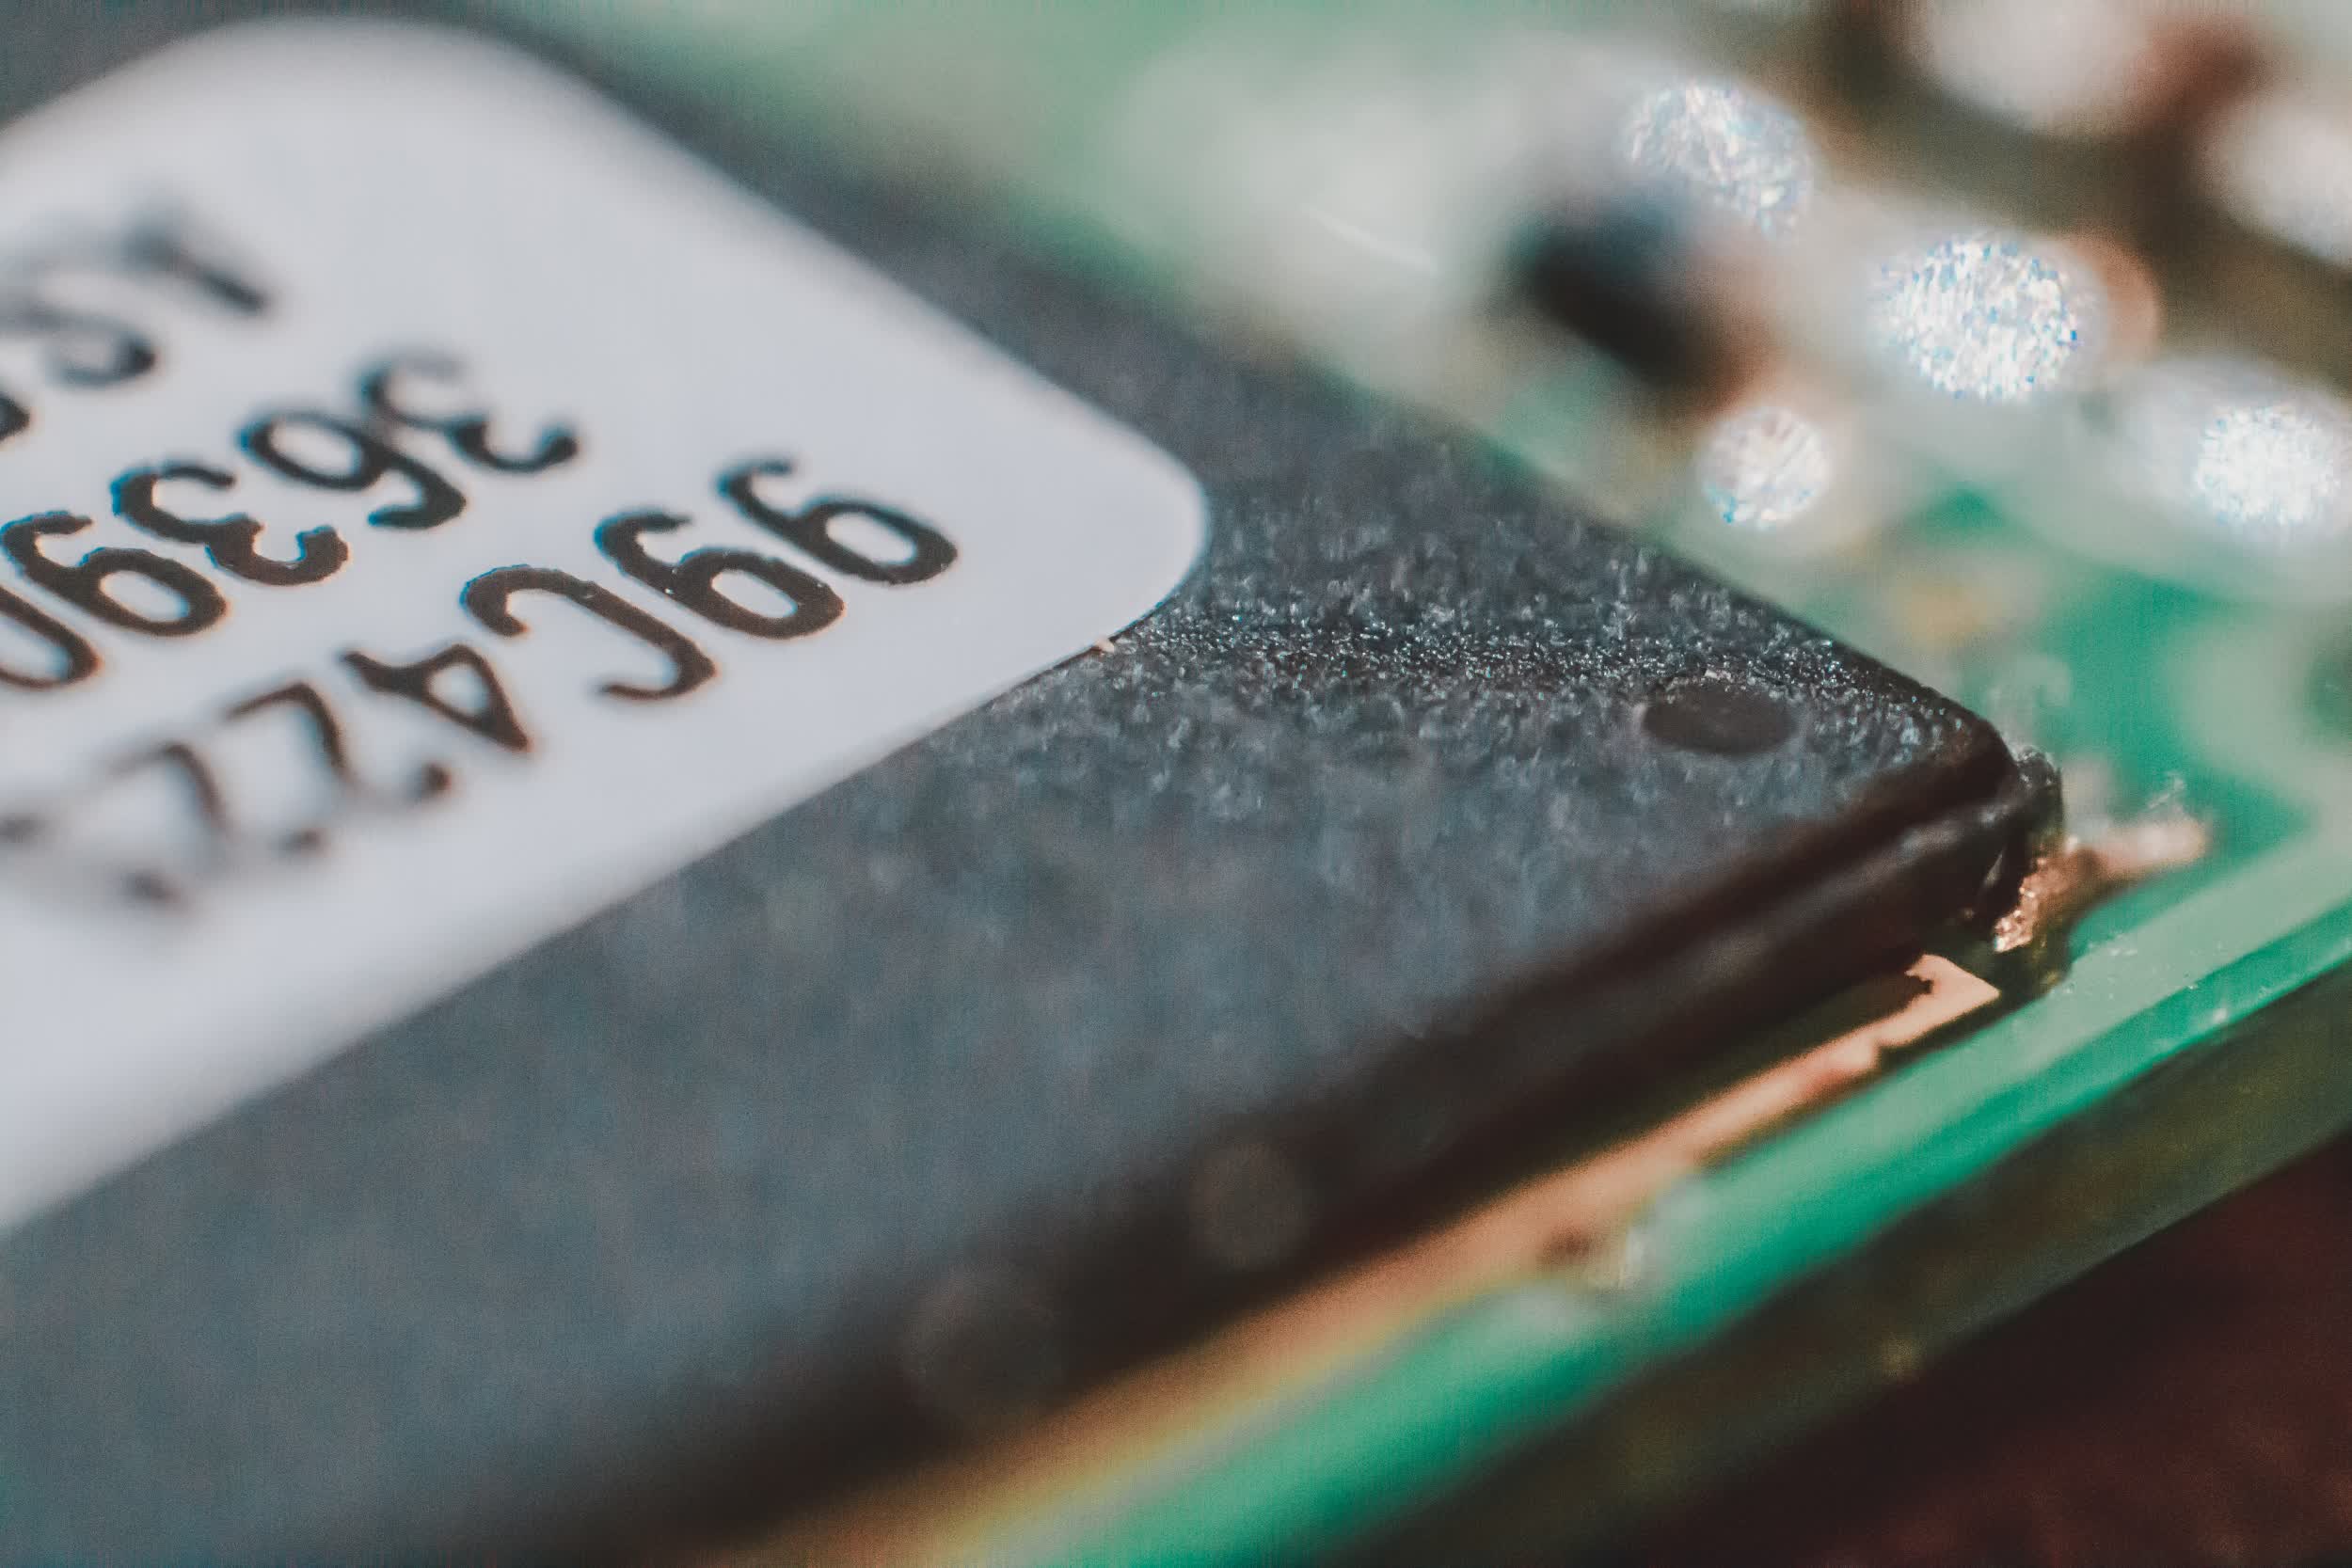 SSD prices could drop as much as 15 percent next quarter due to continued NAND flash oversupply